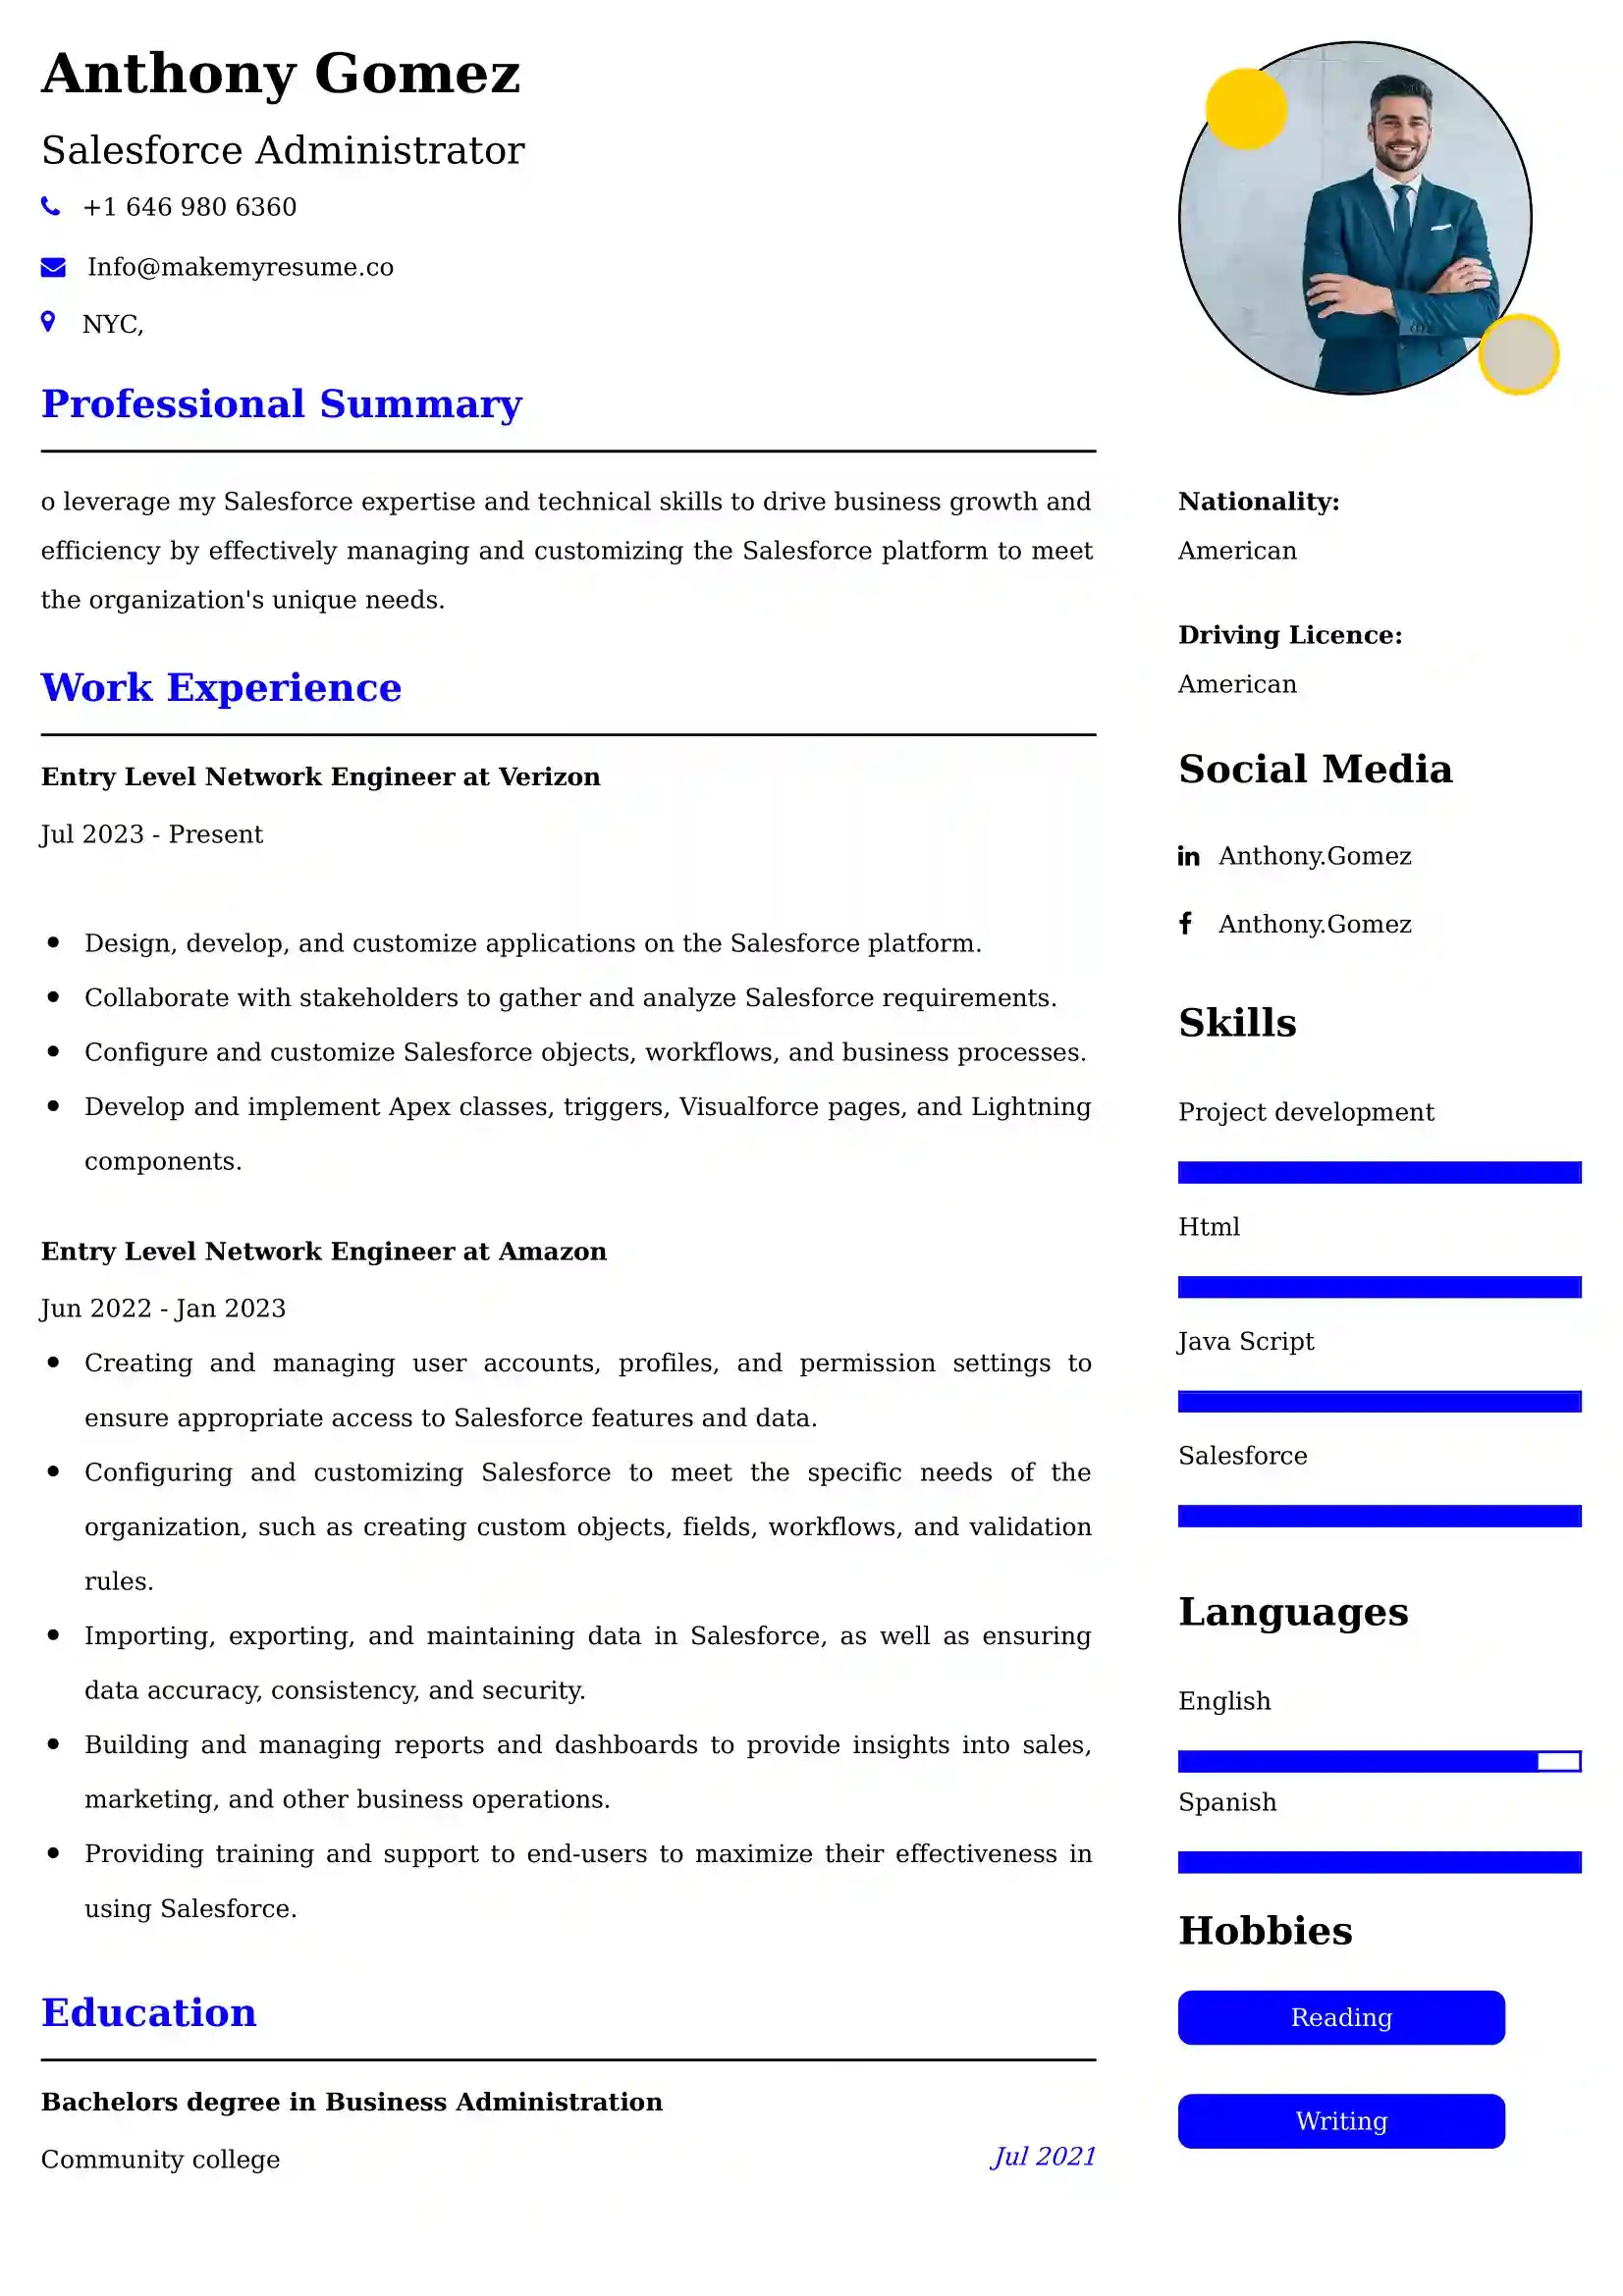 Salesforce Administrator Resume Examples - UK Format, Latest Template.